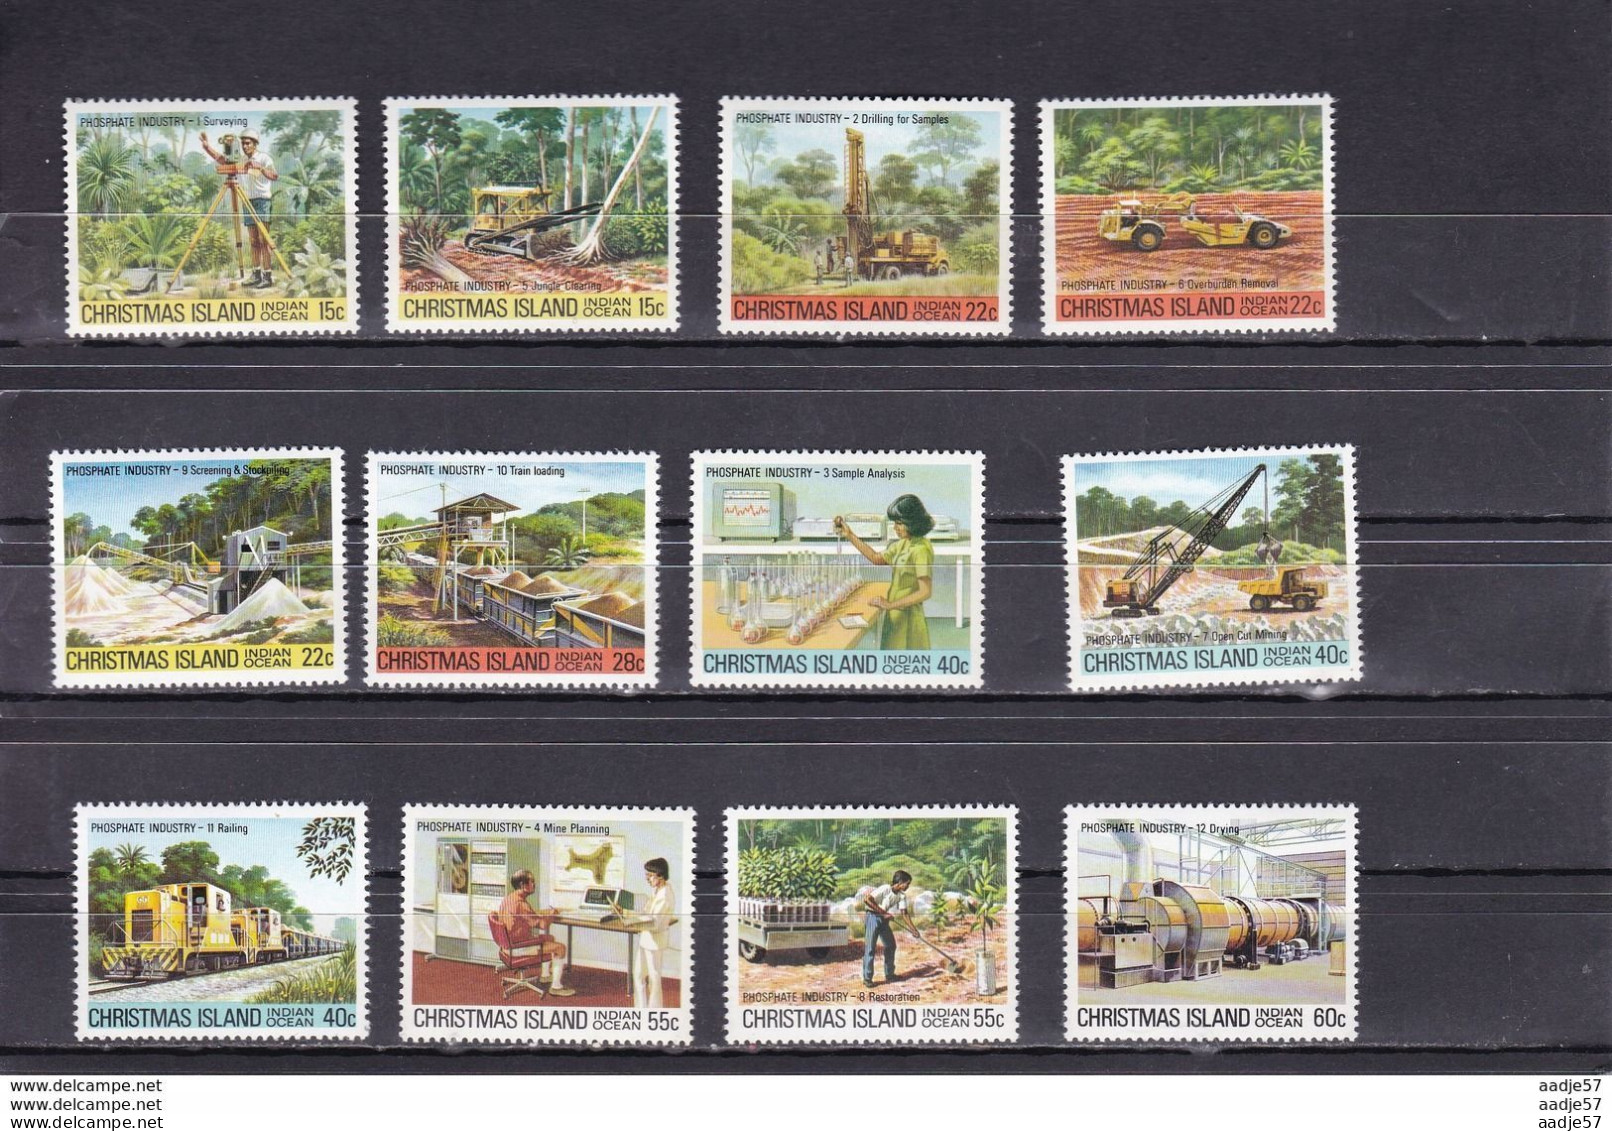 Christmas Island 1980 - 1981 Phoshate  Industry MNH ** 5825 - Minerals